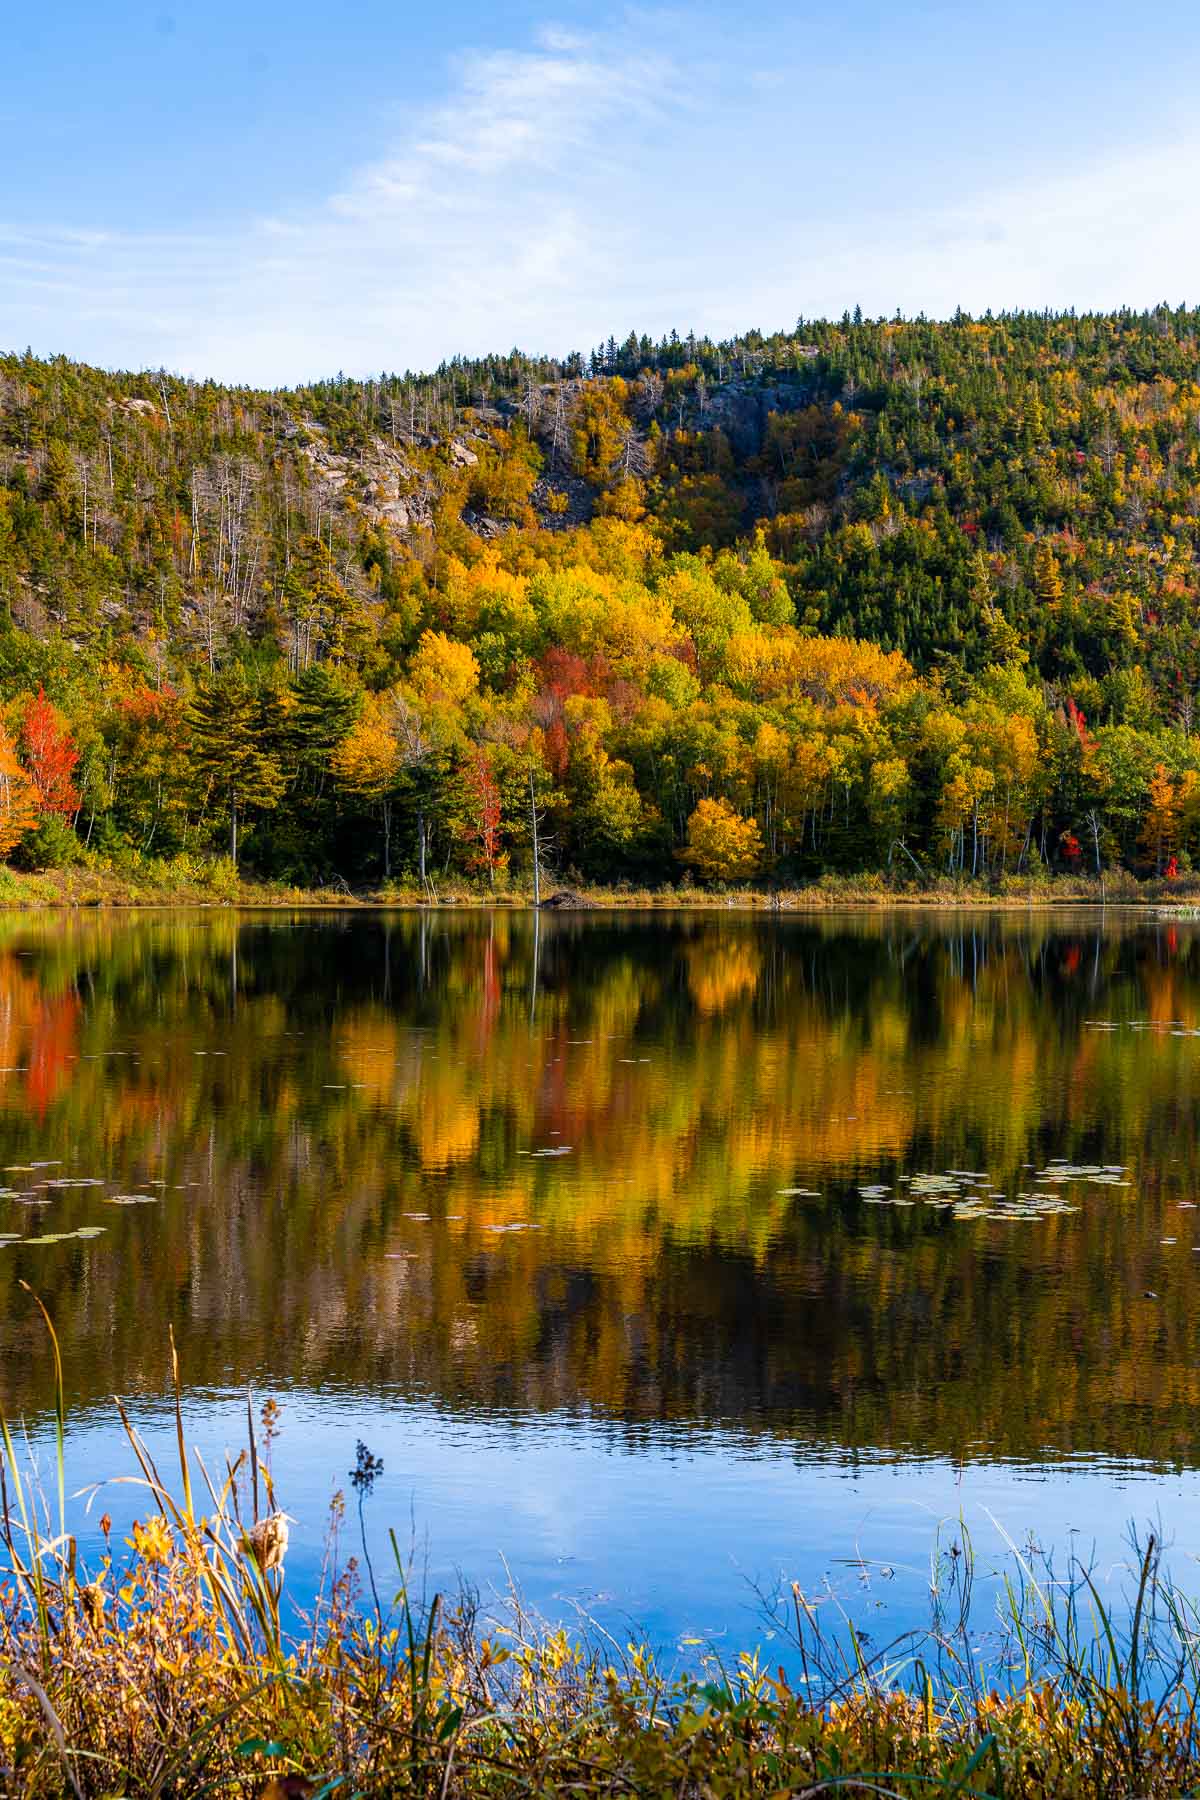 Reflection on the lake in Acadia National Park